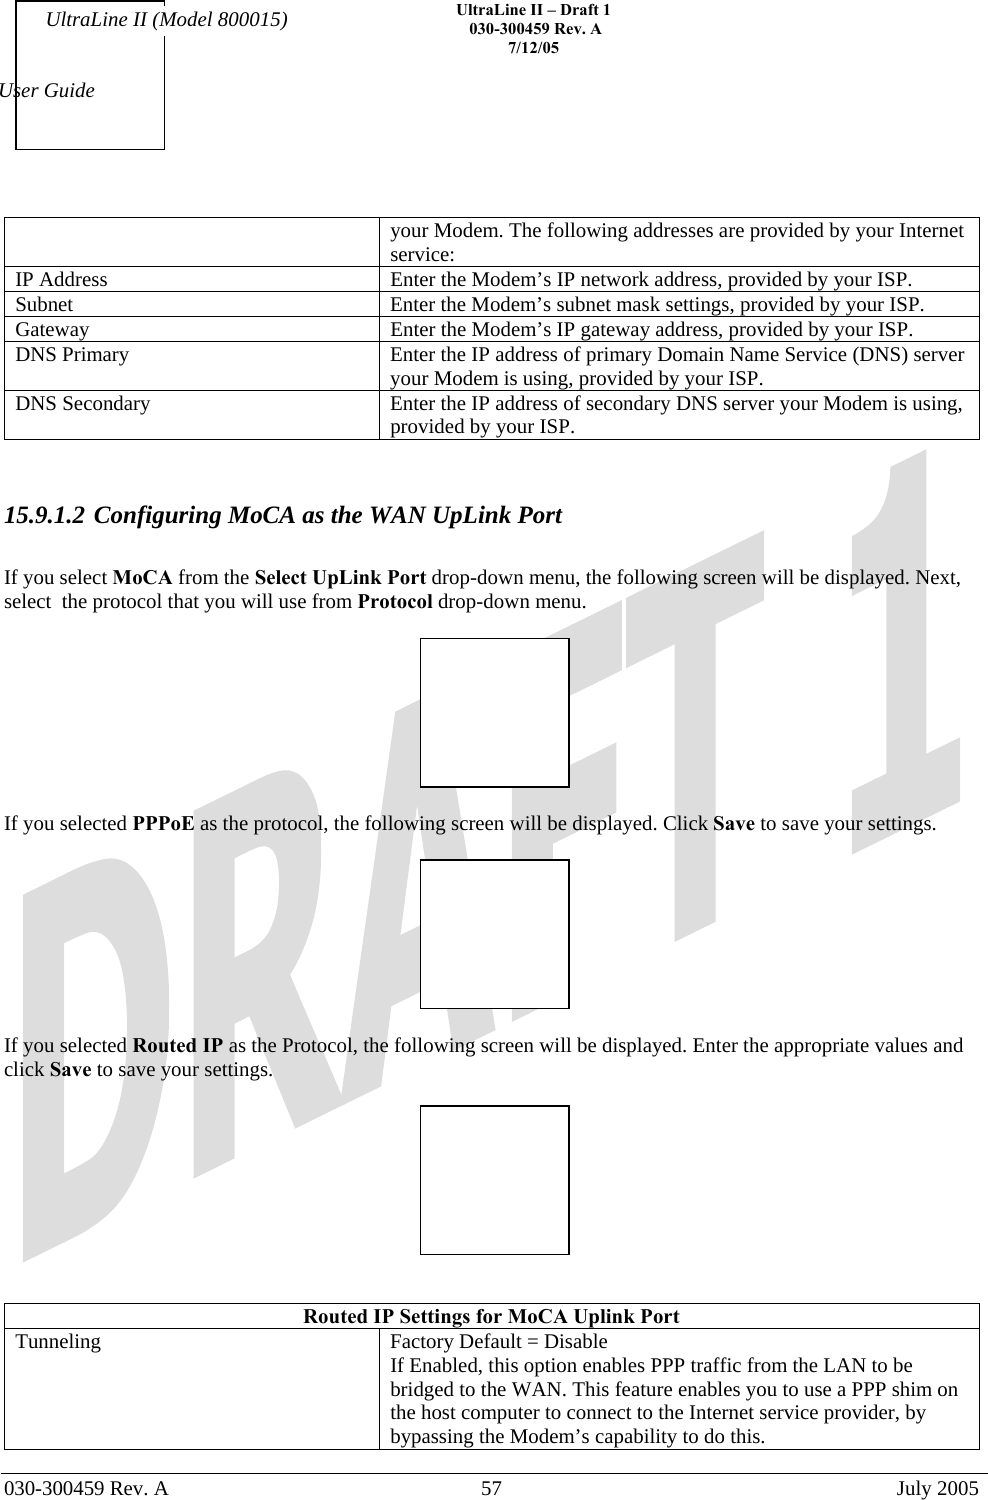    UltraLine II – Draft 1   030-300459 Rev. A 7/12/05   030-300459 Rev. A  57  July 2005  User Guide UltraLine II (Model 800015) your Modem. The following addresses are provided by your Internet service: IP Address  Enter the Modem’s IP network address, provided by your ISP. Subnet  Enter the Modem’s subnet mask settings, provided by your ISP. Gateway  Enter the Modem’s IP gateway address, provided by your ISP. DNS Primary  Enter the IP address of primary Domain Name Service (DNS) server your Modem is using, provided by your ISP. DNS Secondary  Enter the IP address of secondary DNS server your Modem is using, provided by your ISP.   15.9.1.2 Configuring MoCA as the WAN UpLink Port   If you select MoCA from the Select UpLink Port drop-down menu, the following screen will be displayed. Next, select  the protocol that you will use from Protocol drop-down menu.    If you selected PPPoE as the protocol, the following screen will be displayed. Click Save to save your settings.    If you selected Routed IP as the Protocol, the following screen will be displayed. Enter the appropriate values and click Save to save your settings.     Routed IP Settings for MoCA Uplink Port Tunneling  Factory Default = Disable If Enabled, this option enables PPP traffic from the LAN to be bridged to the WAN. This feature enables you to use a PPP shim on the host computer to connect to the Internet service provider, by bypassing the Modem’s capability to do this. 